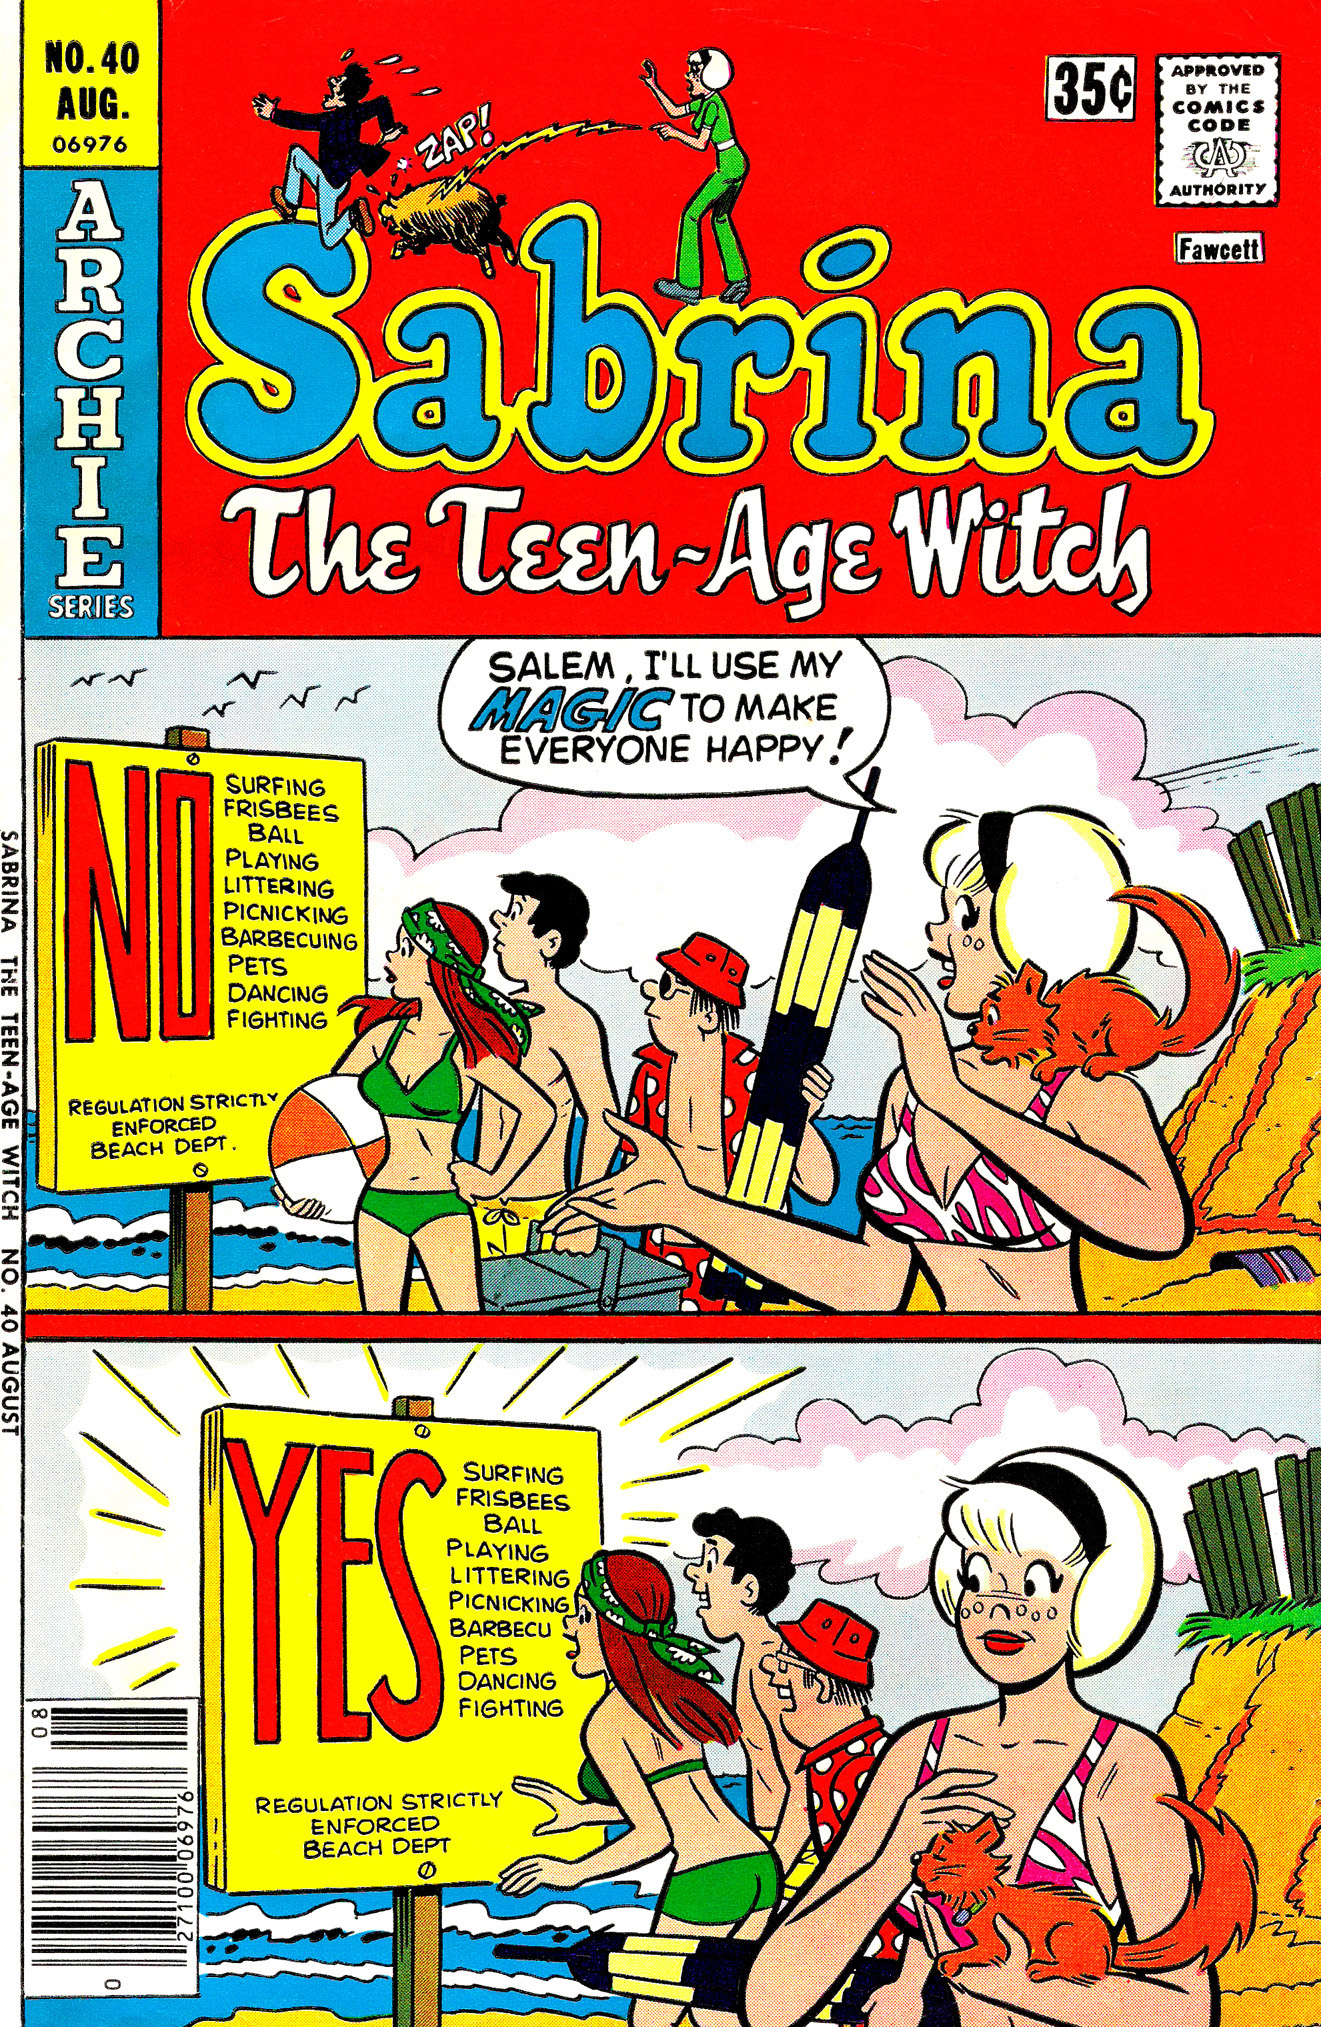 Sabrina The Teenage Witch (1971) Issue #40 #40 - English 1